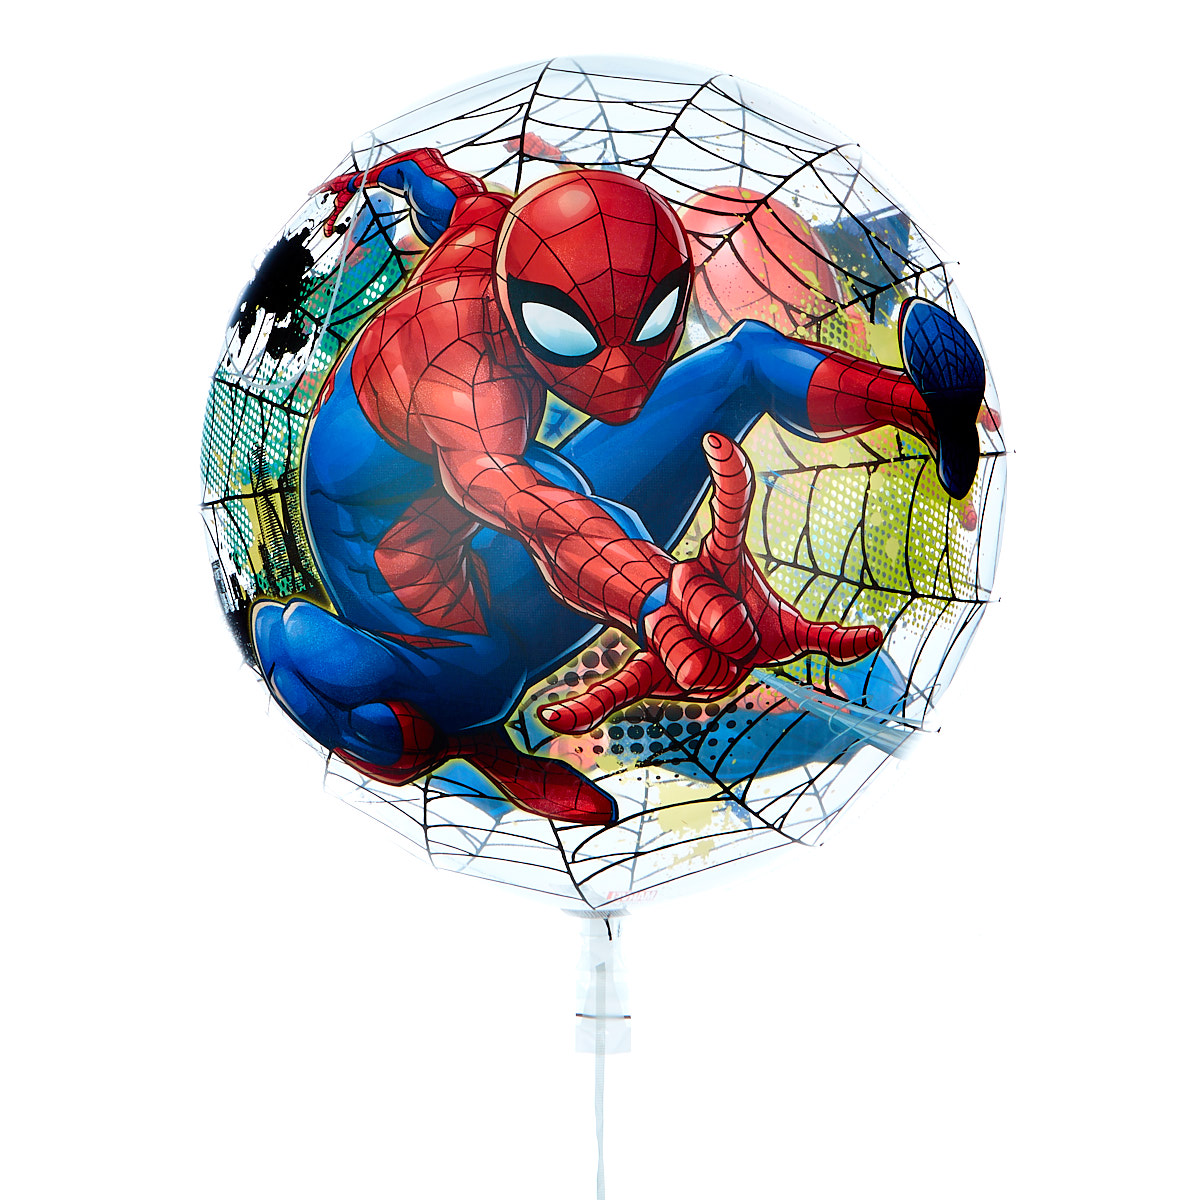 22-Inch Bubble Balloon - Marvel's Spider-Man - DELIVERED INFLATED!